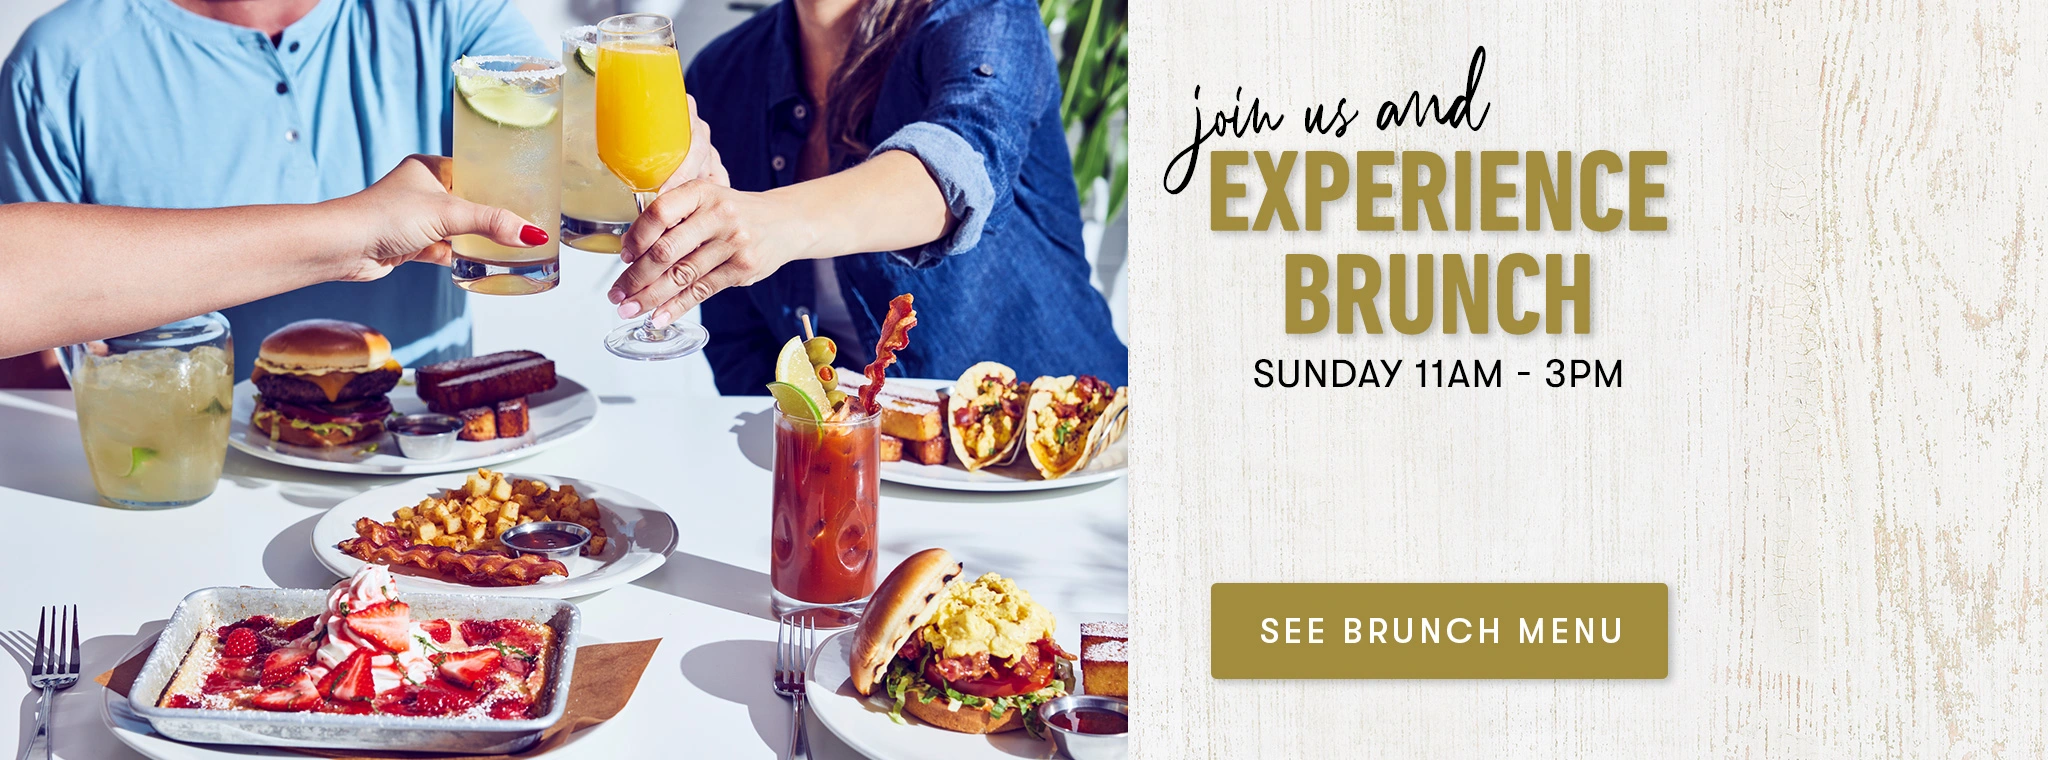 experience brunch banner